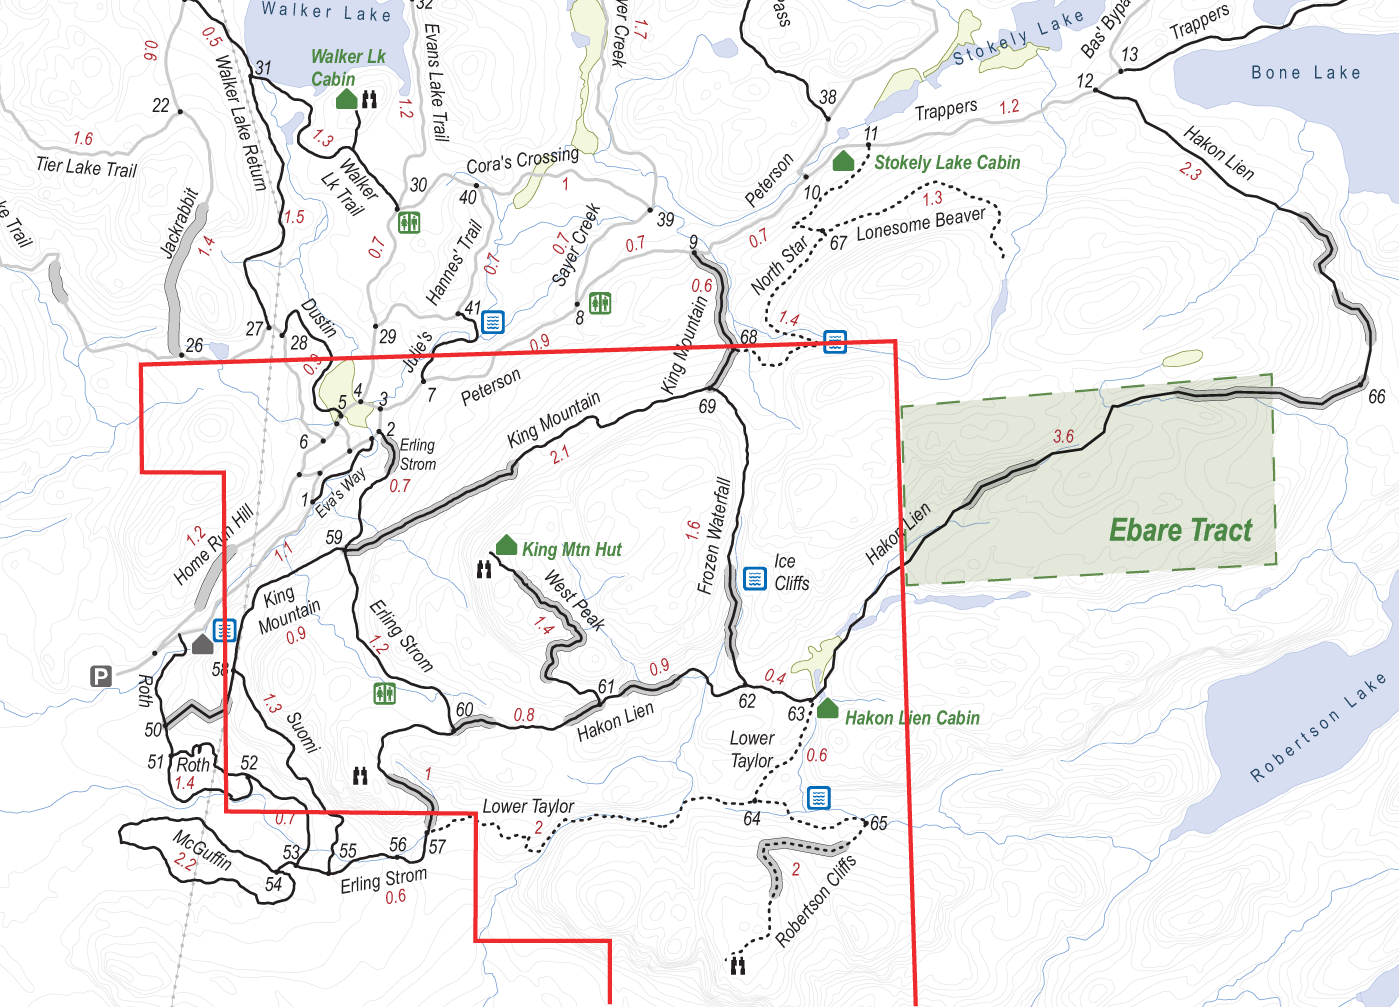 Map of Ebare Tract in Algoma Highlands Conservancy land.